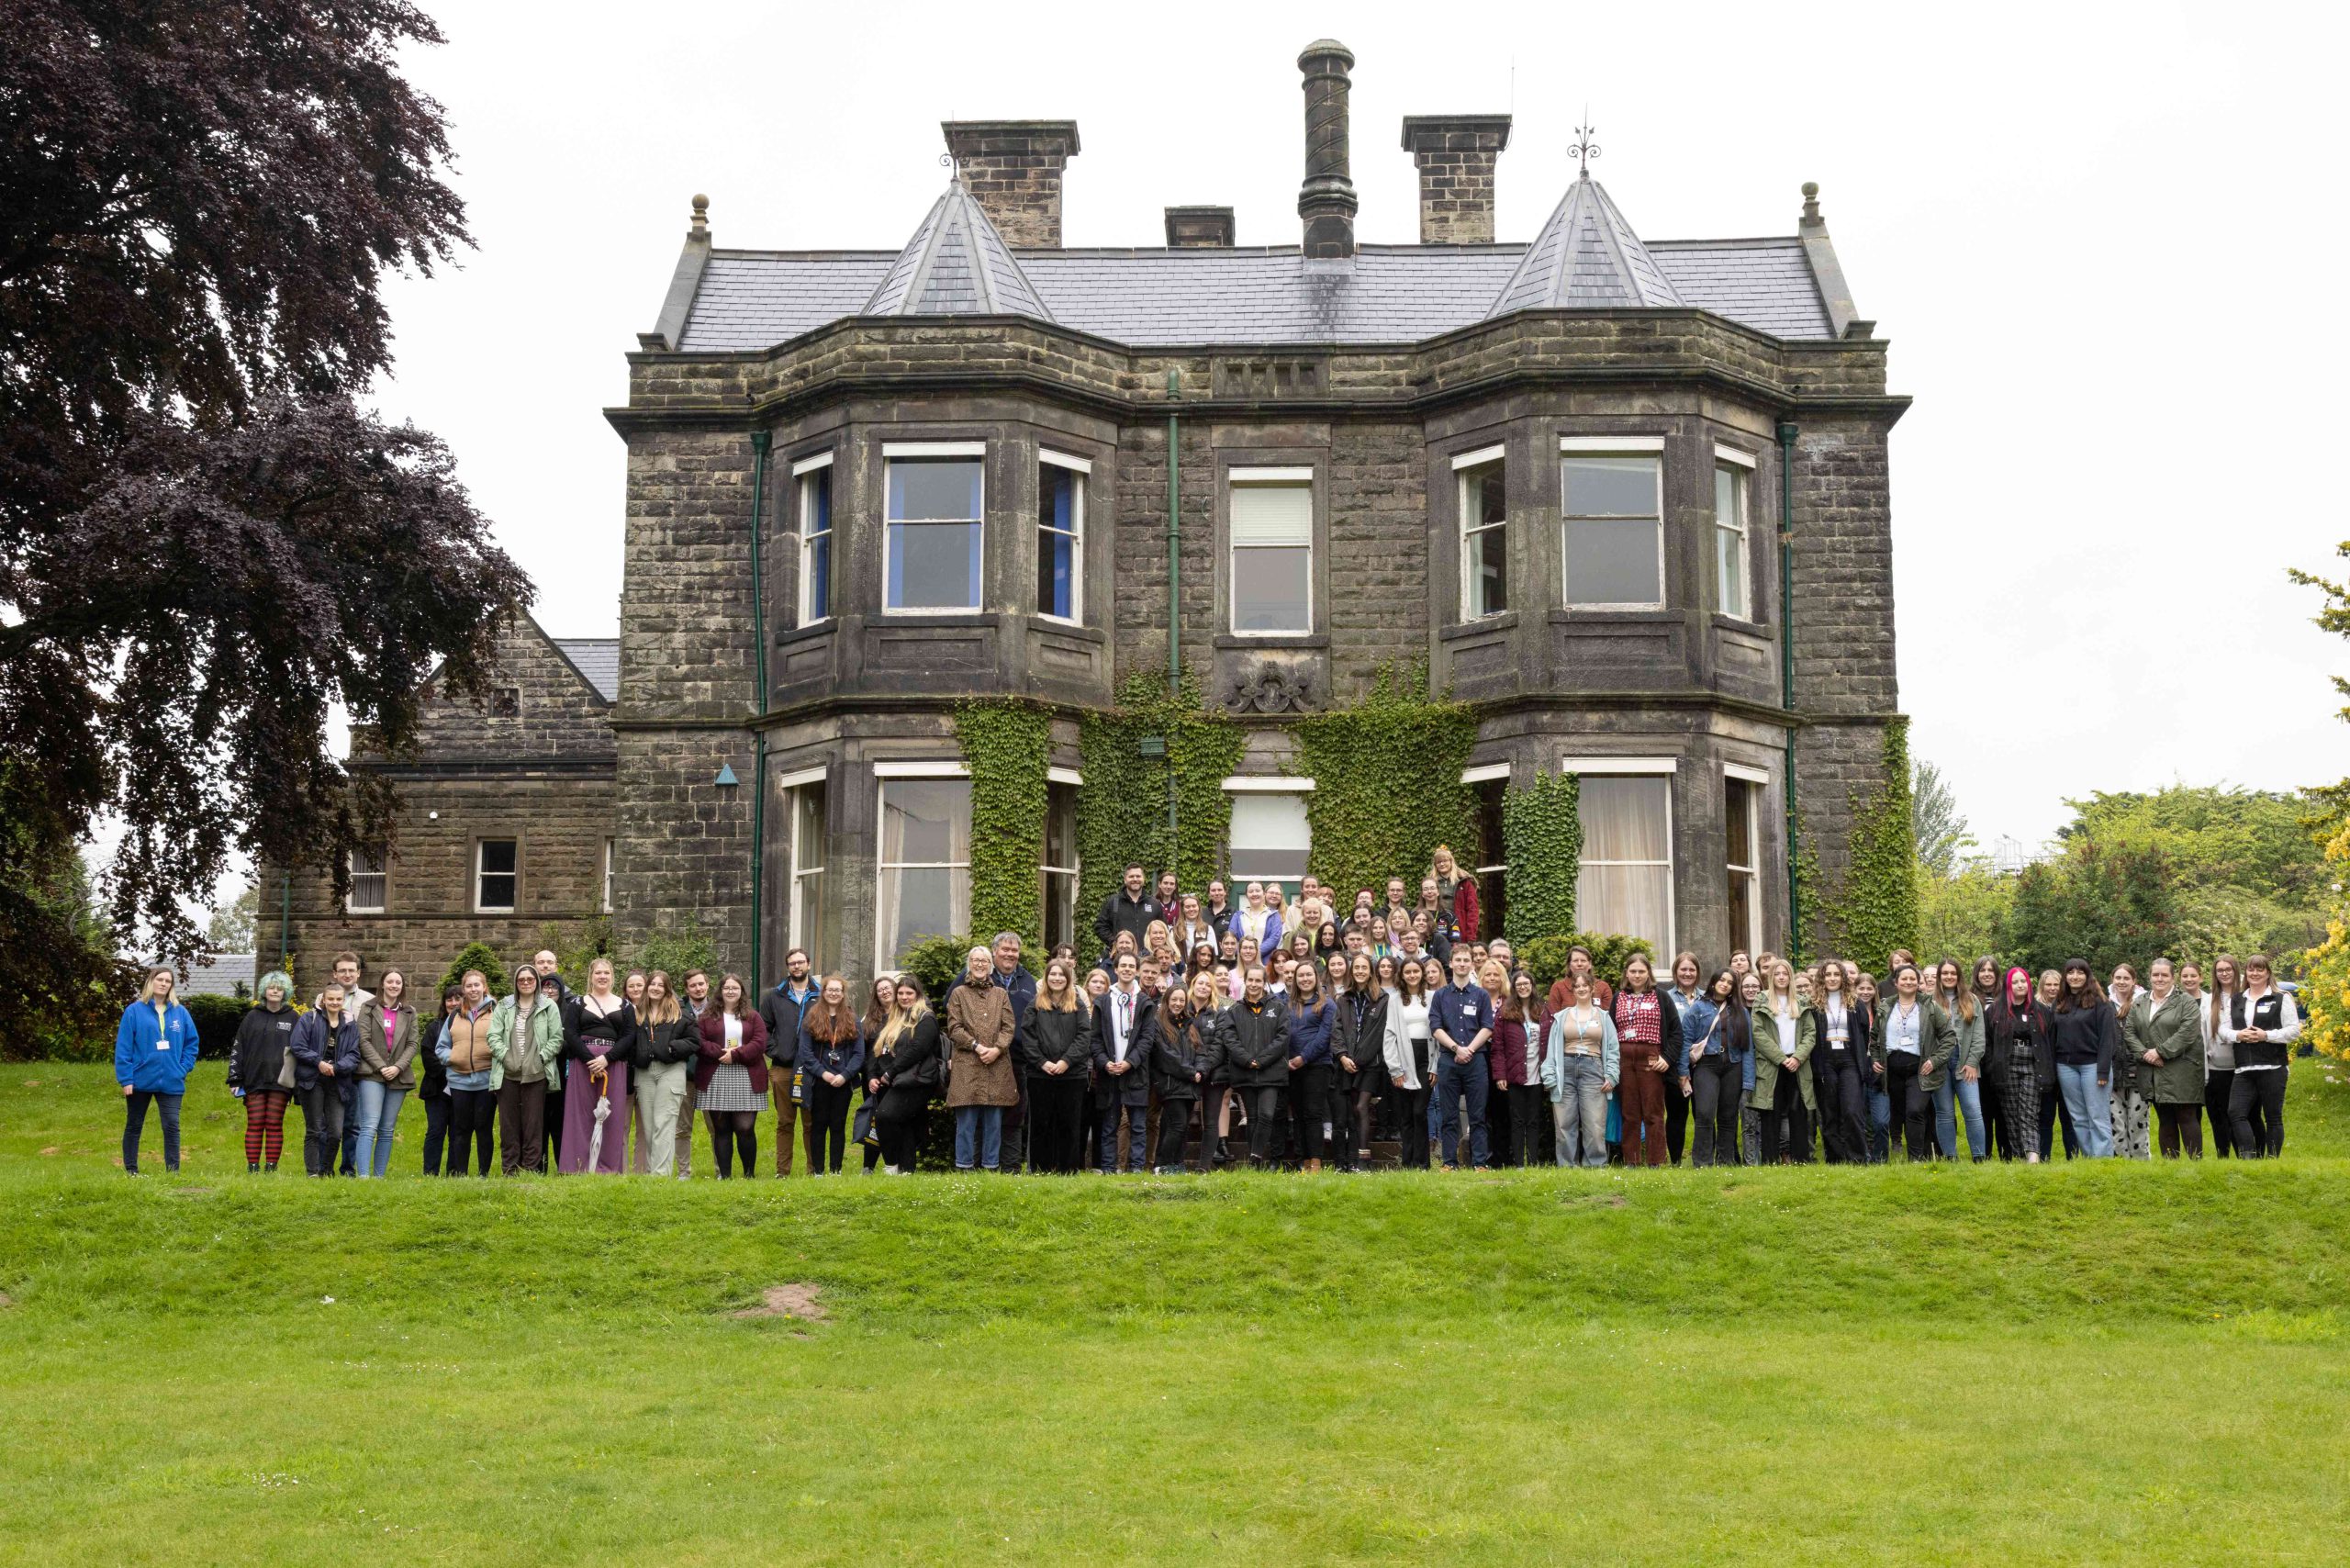 Students and other attendees at the Inter-College Challenge stood on grass infront of an old stone building, the Old Hall at Broomfield Hall